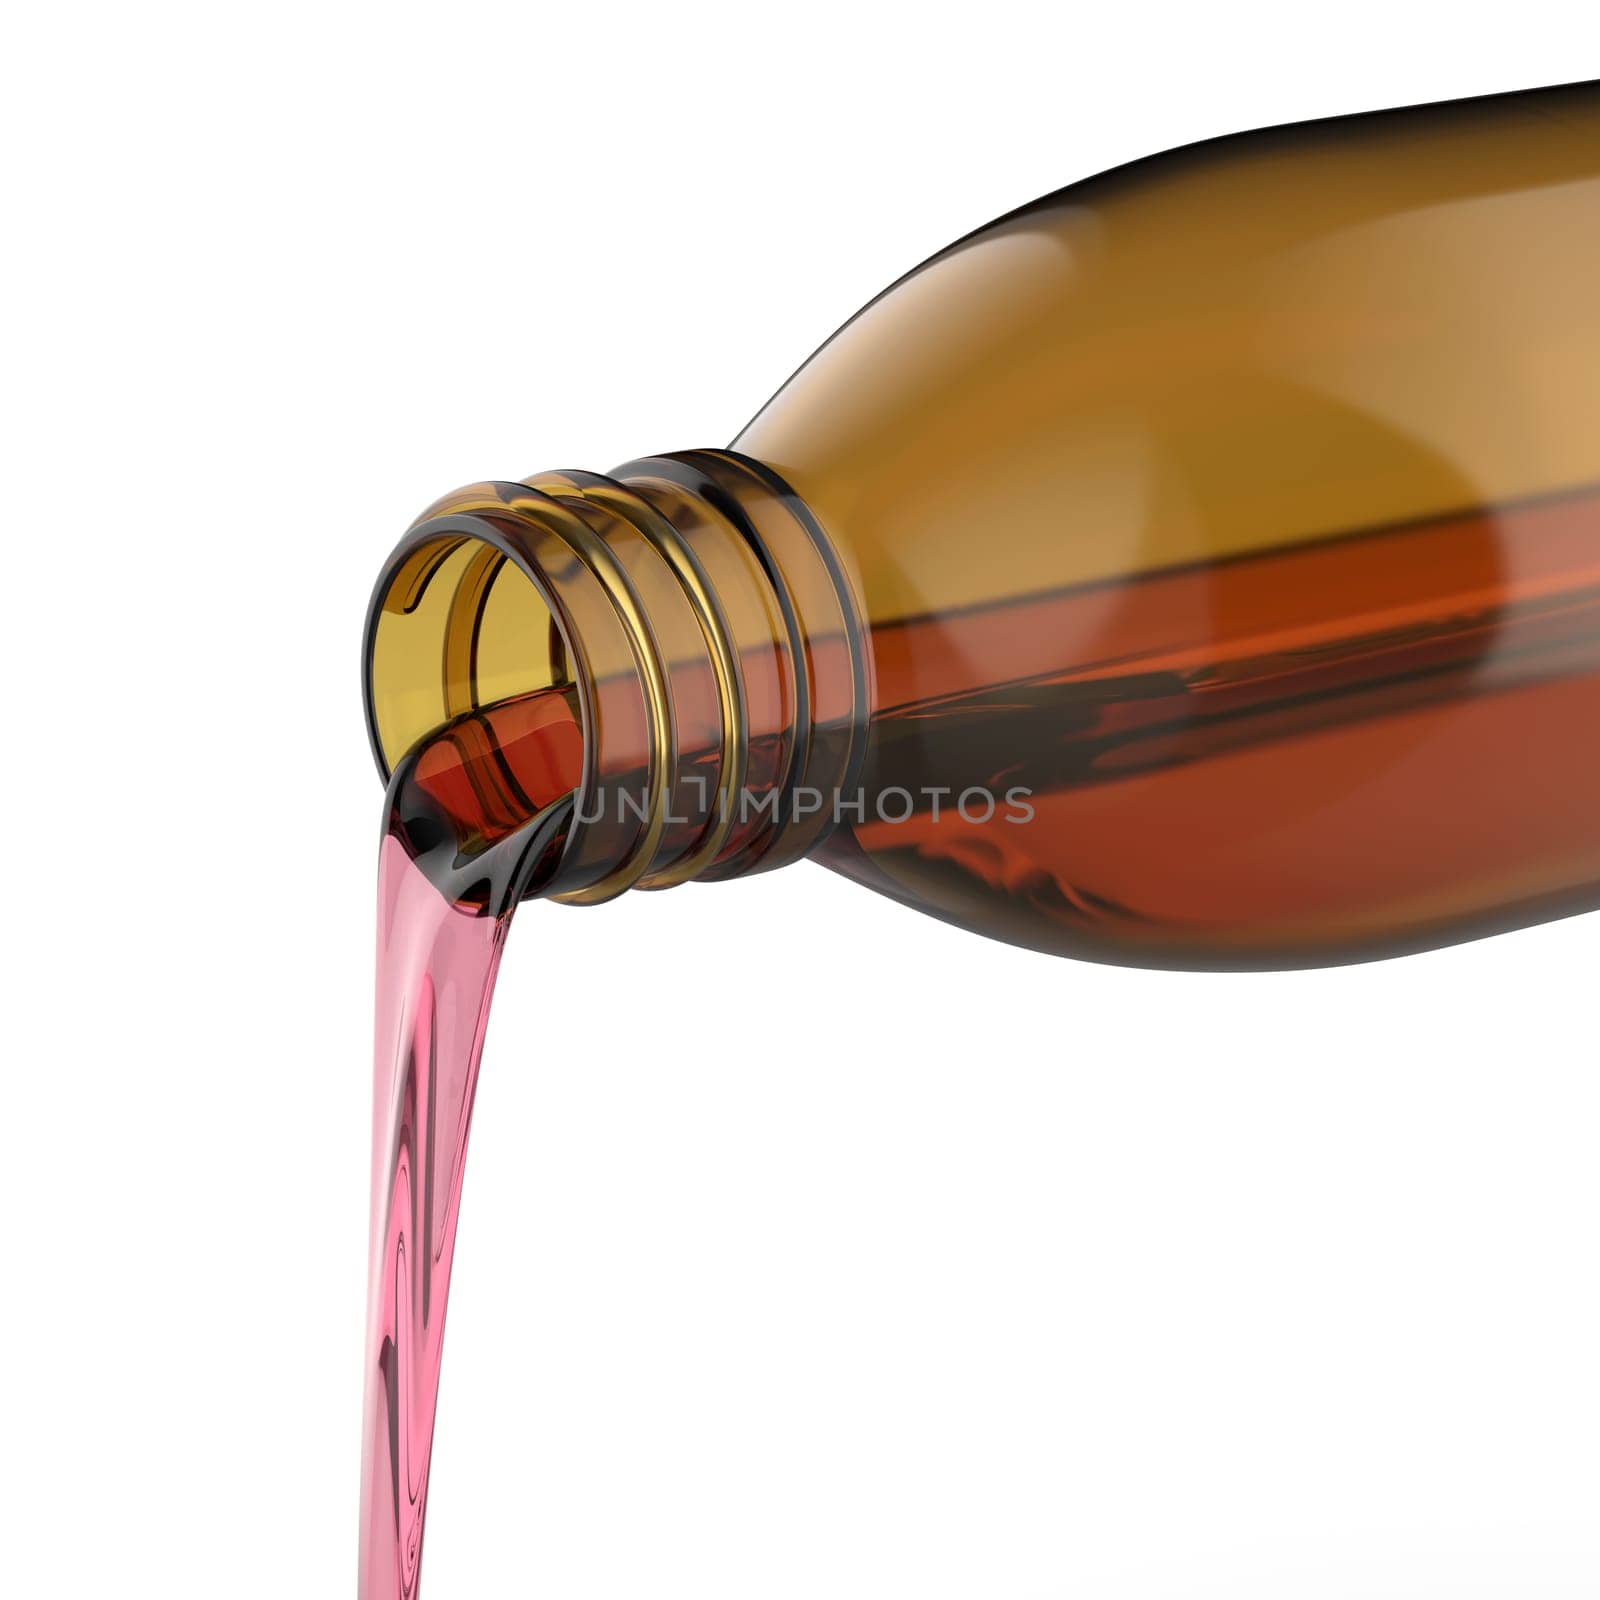 Pouring cough medicine syrup from the amber glass bottle